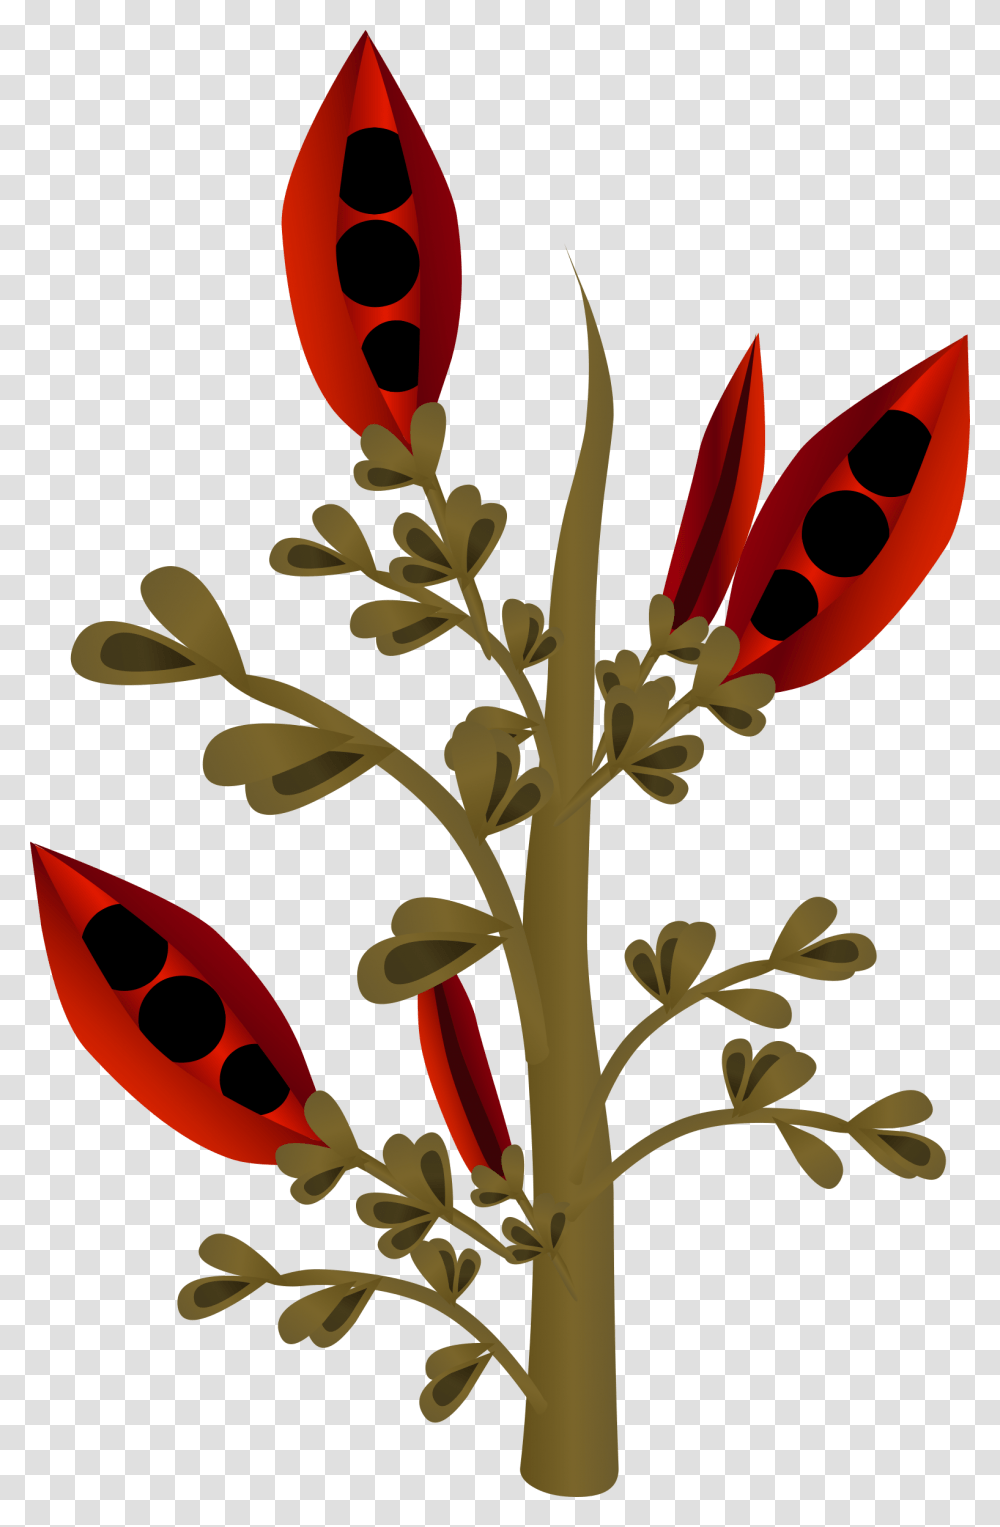 This Free Icons Design Of Firebog Firebean Plants, Flower, Blossom Transparent Png